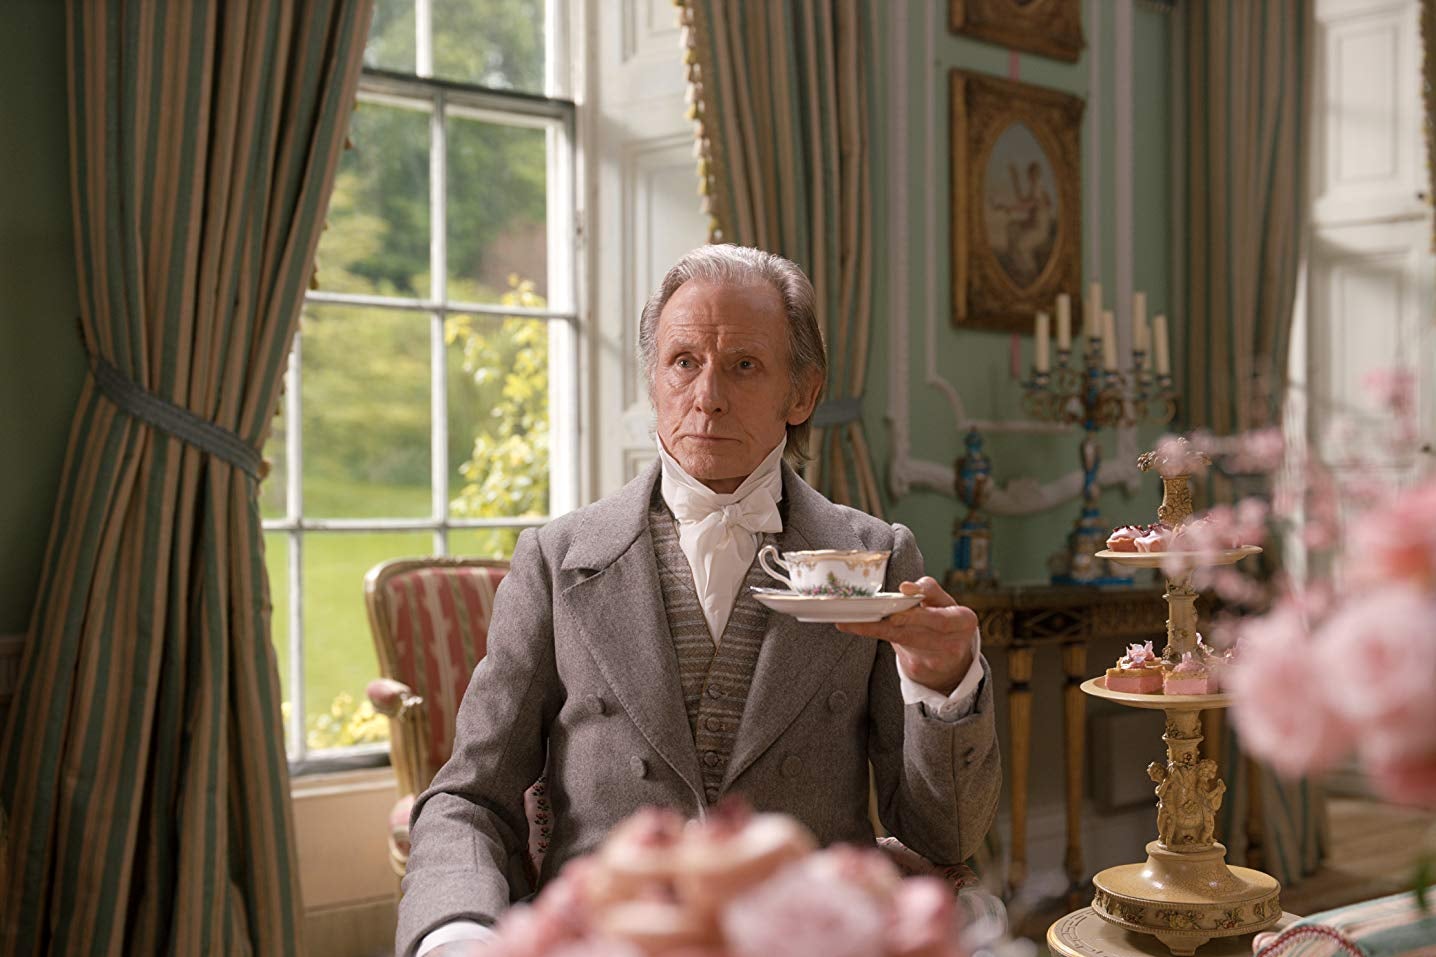 Bill Nighy sits in a lavishly furnished room holding a cup of tea in a saucer. A nearby table is covered in towers of pink desserts.